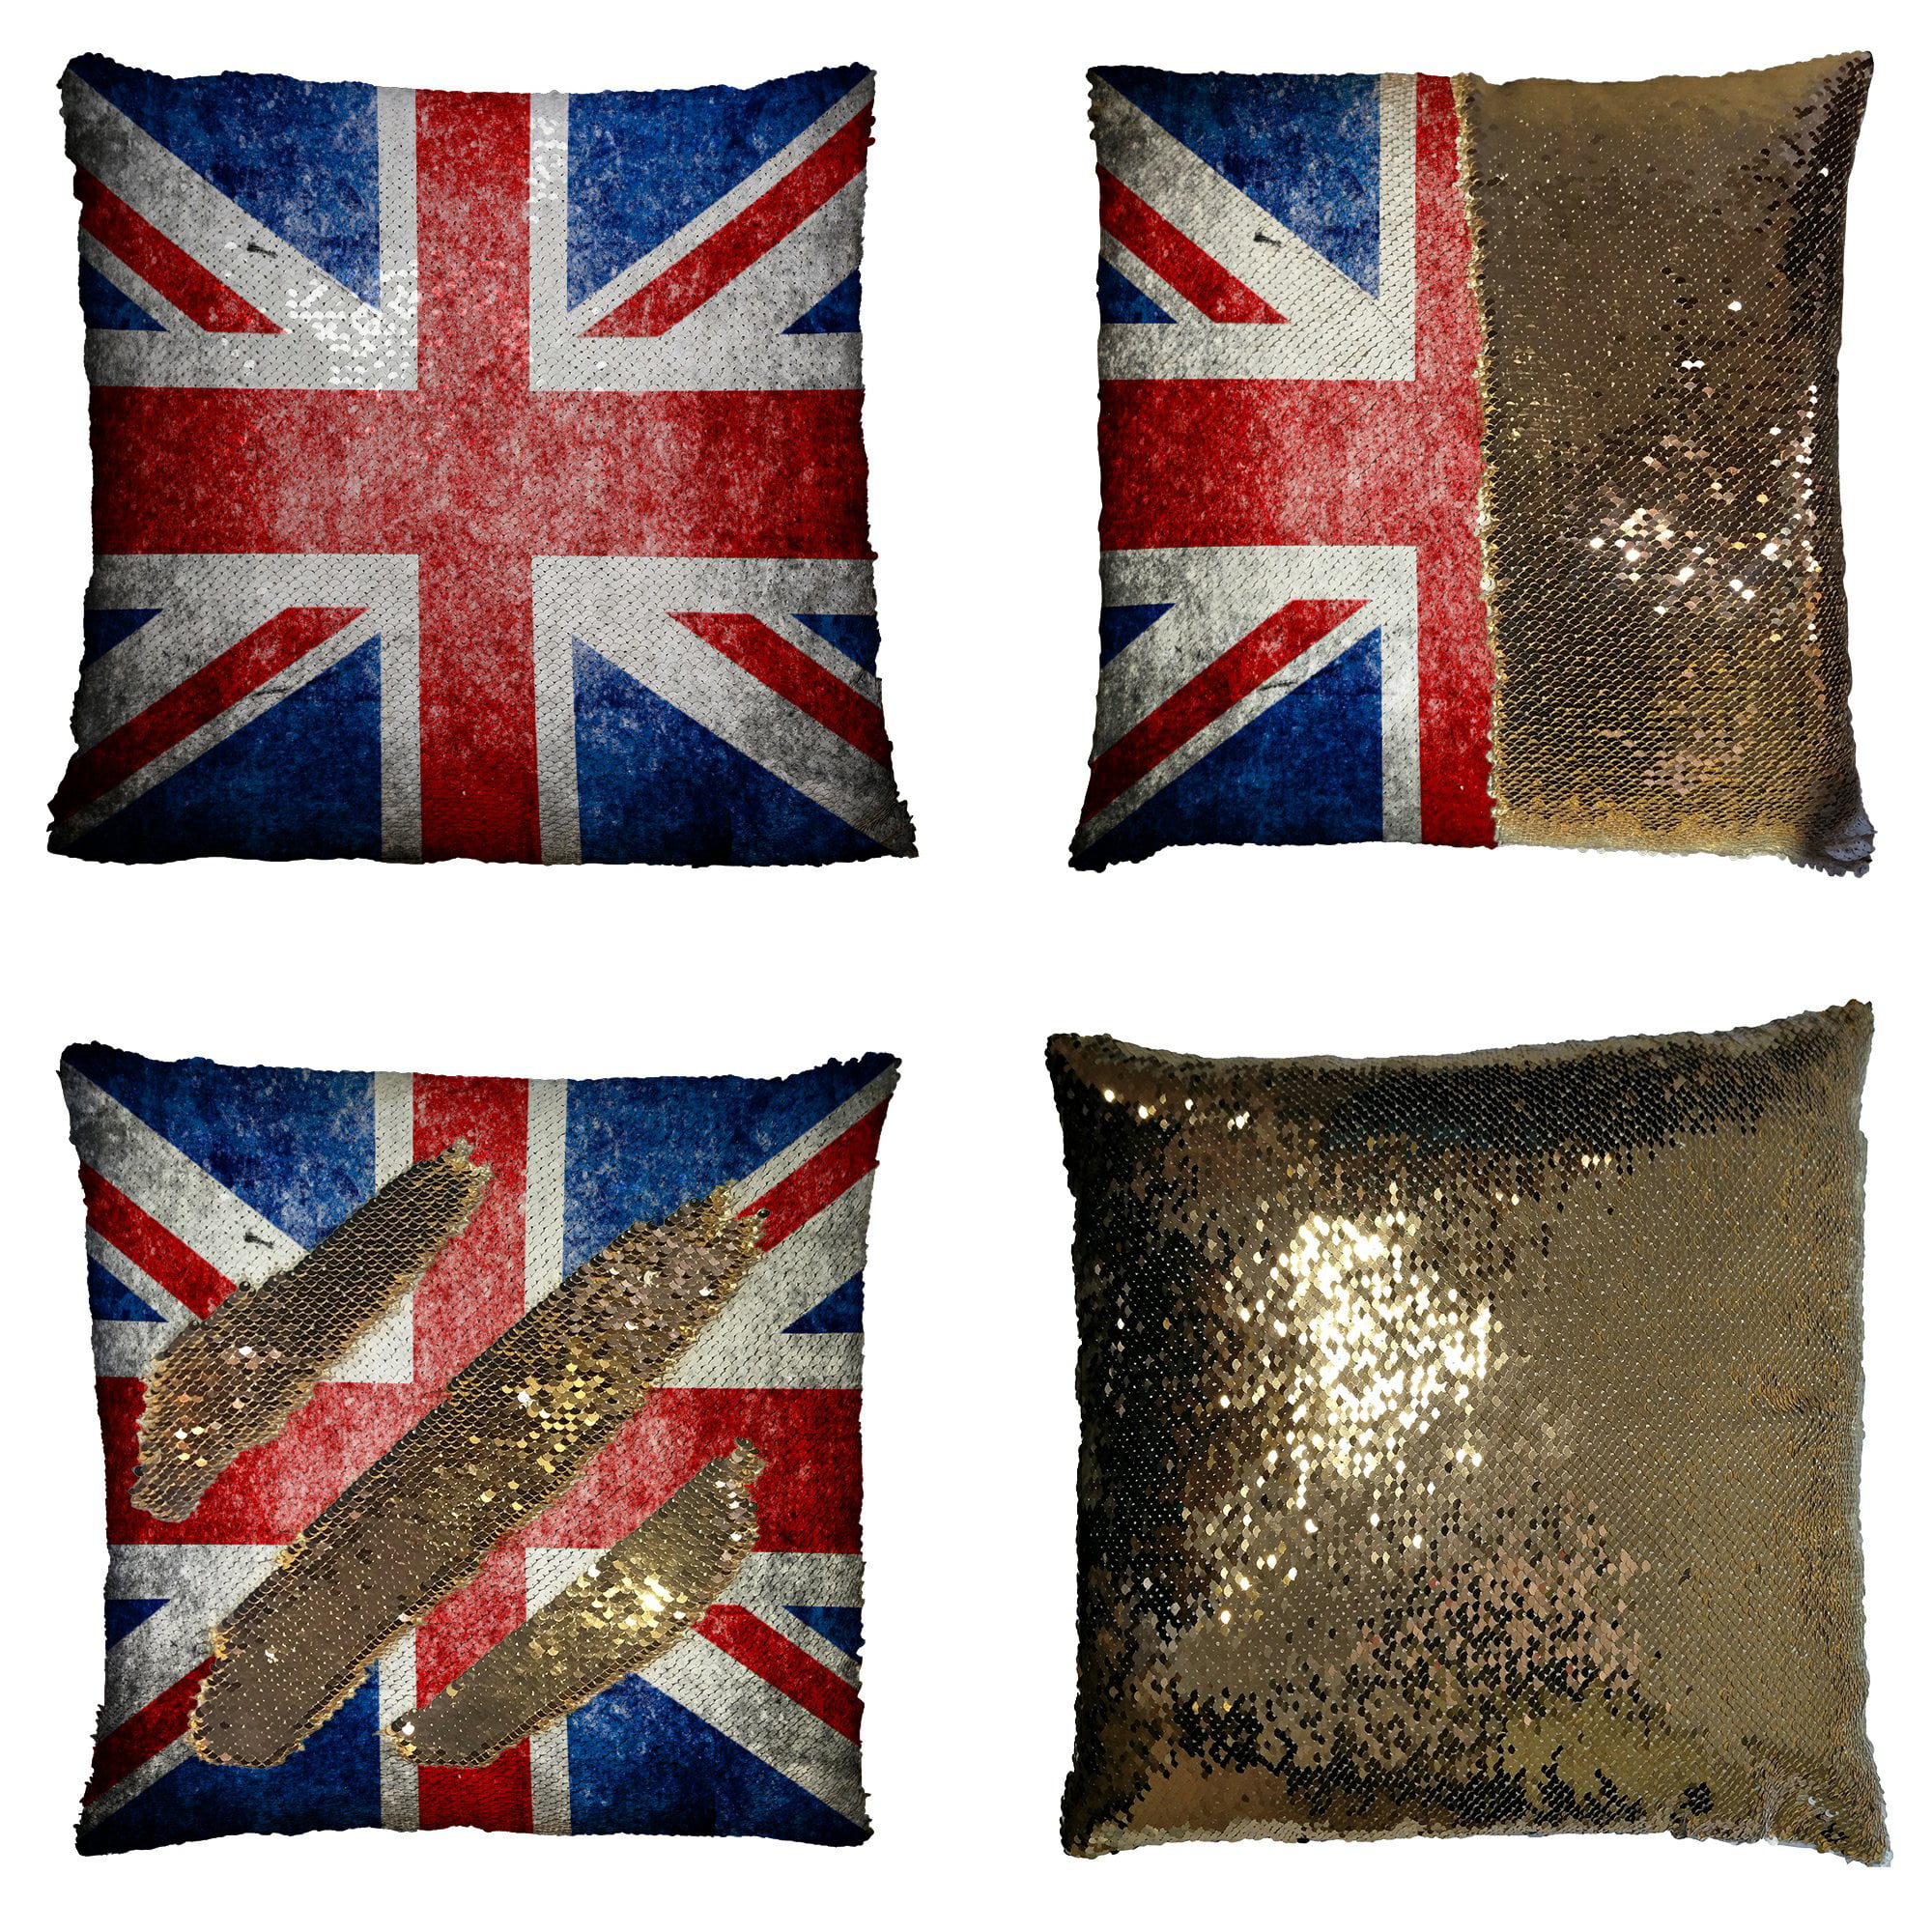 Shabby Chic Abstract Union Jack 16" x 16" Cushion Cover in Muted Reds and Blues 